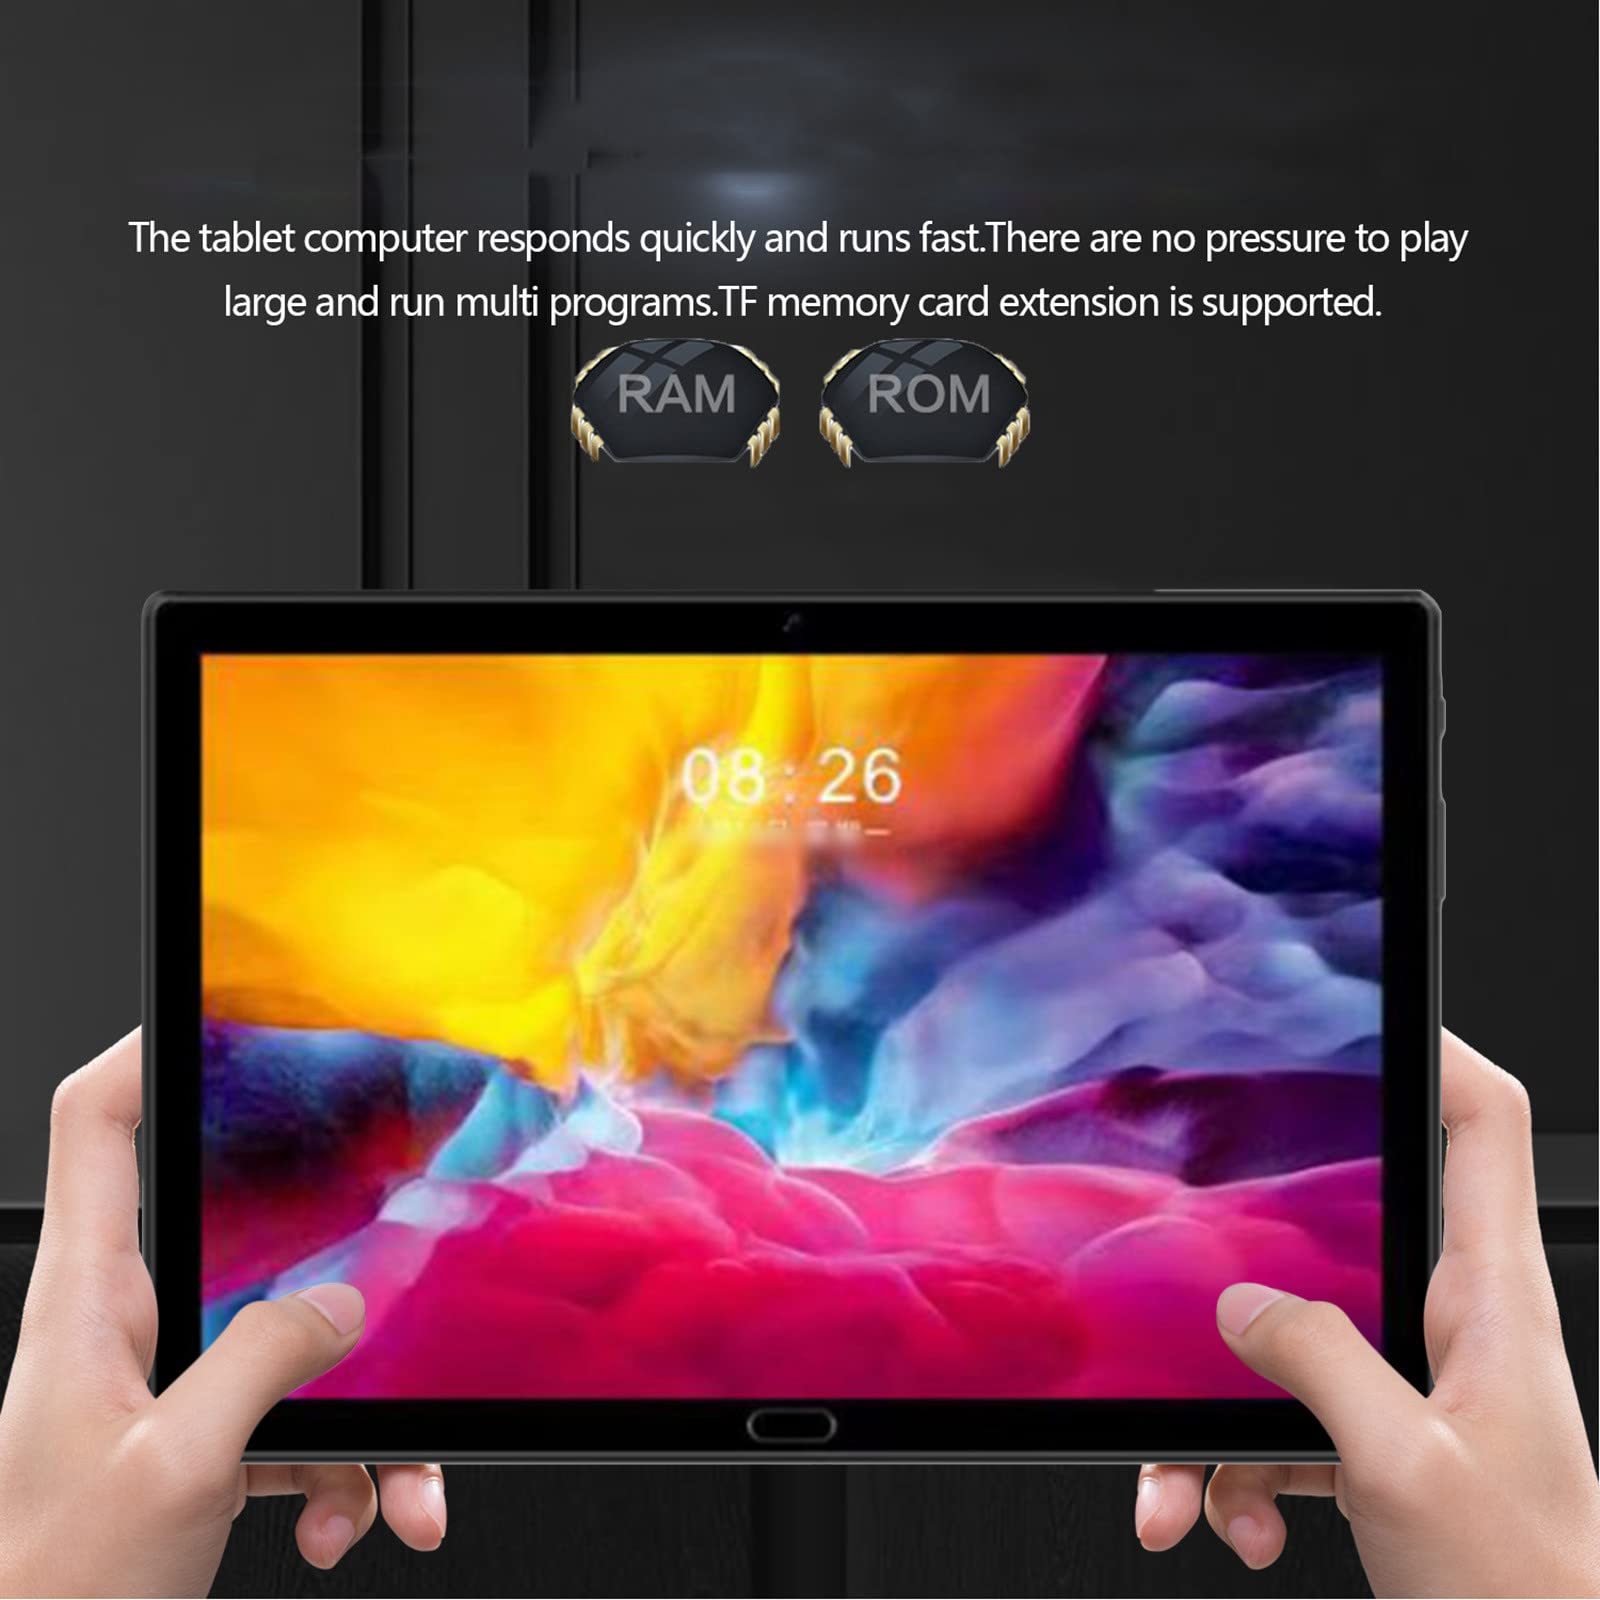 10.1 InHd Android Tablet WiFi Bluetooth Call Gaming Tablet Electronics for Men Digital Notepad College Supplies Boyfriend Girlfriend Gifts Car Travel Accessories for Long Trips Cool Stuff (Black)